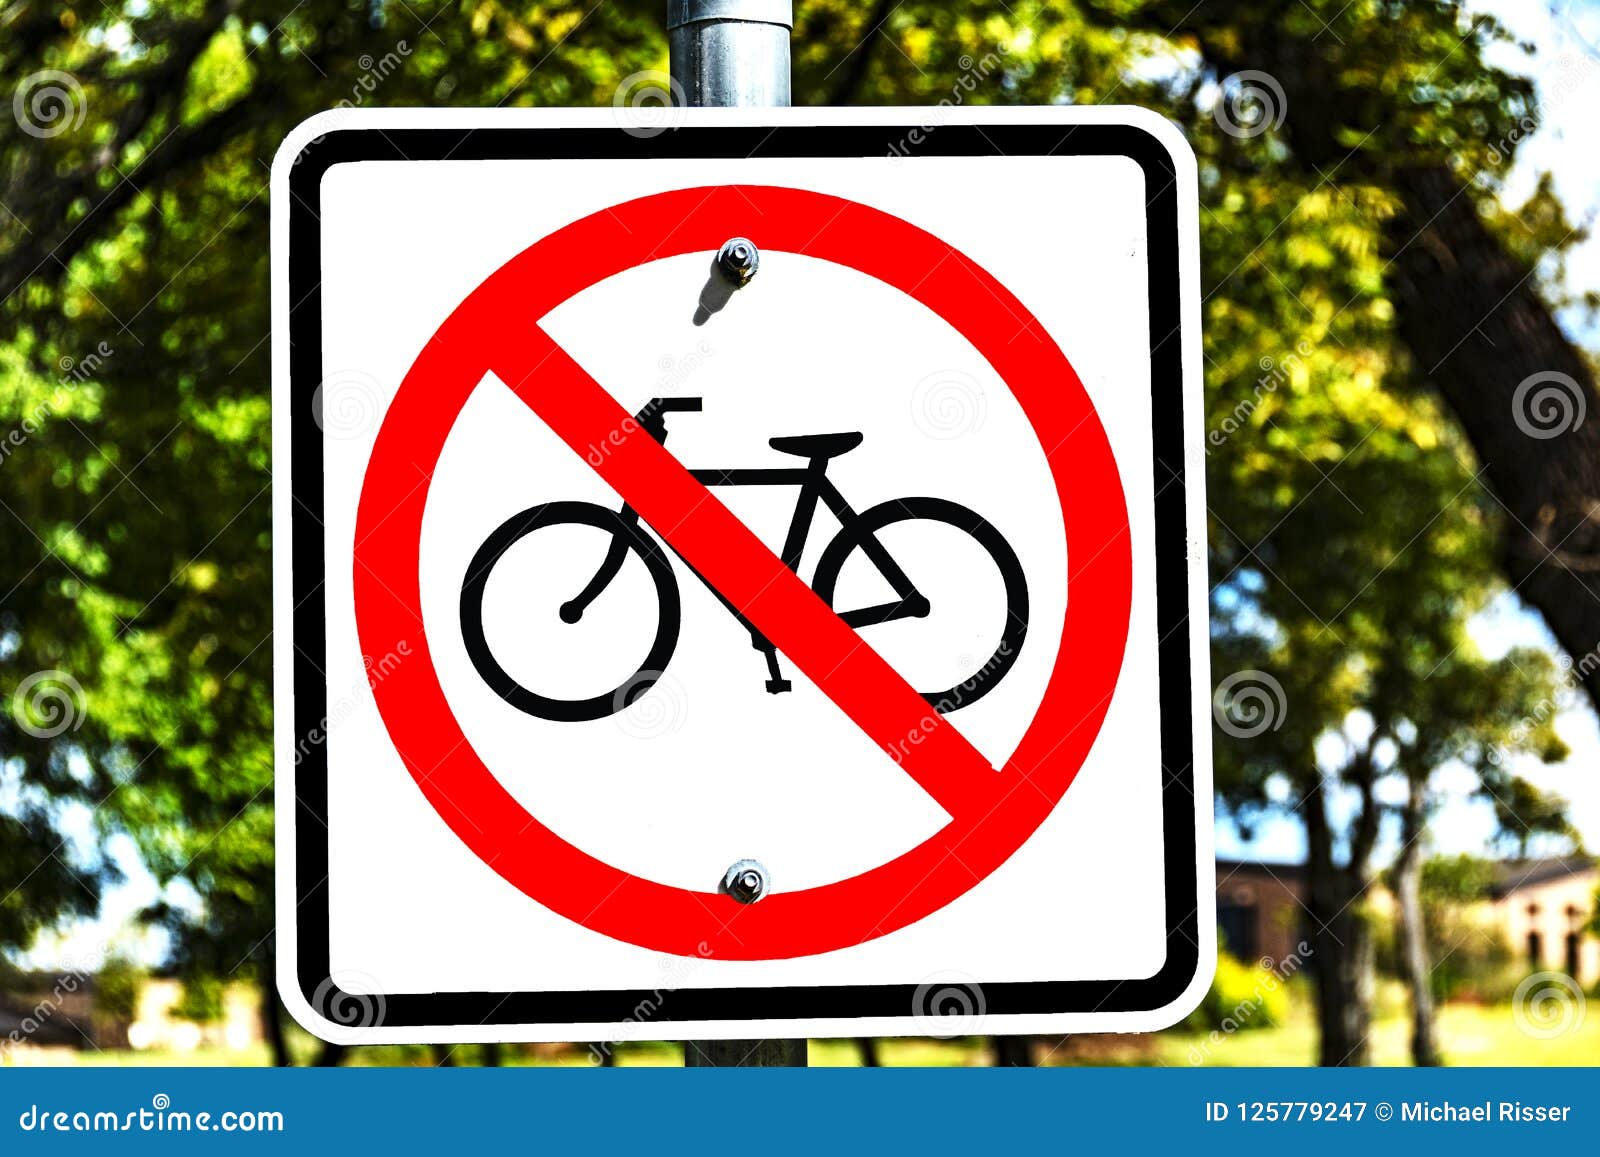 No Bicycle Sign - Red Circle with Slash Stock Image - Image of bicycle,  path: 125779247